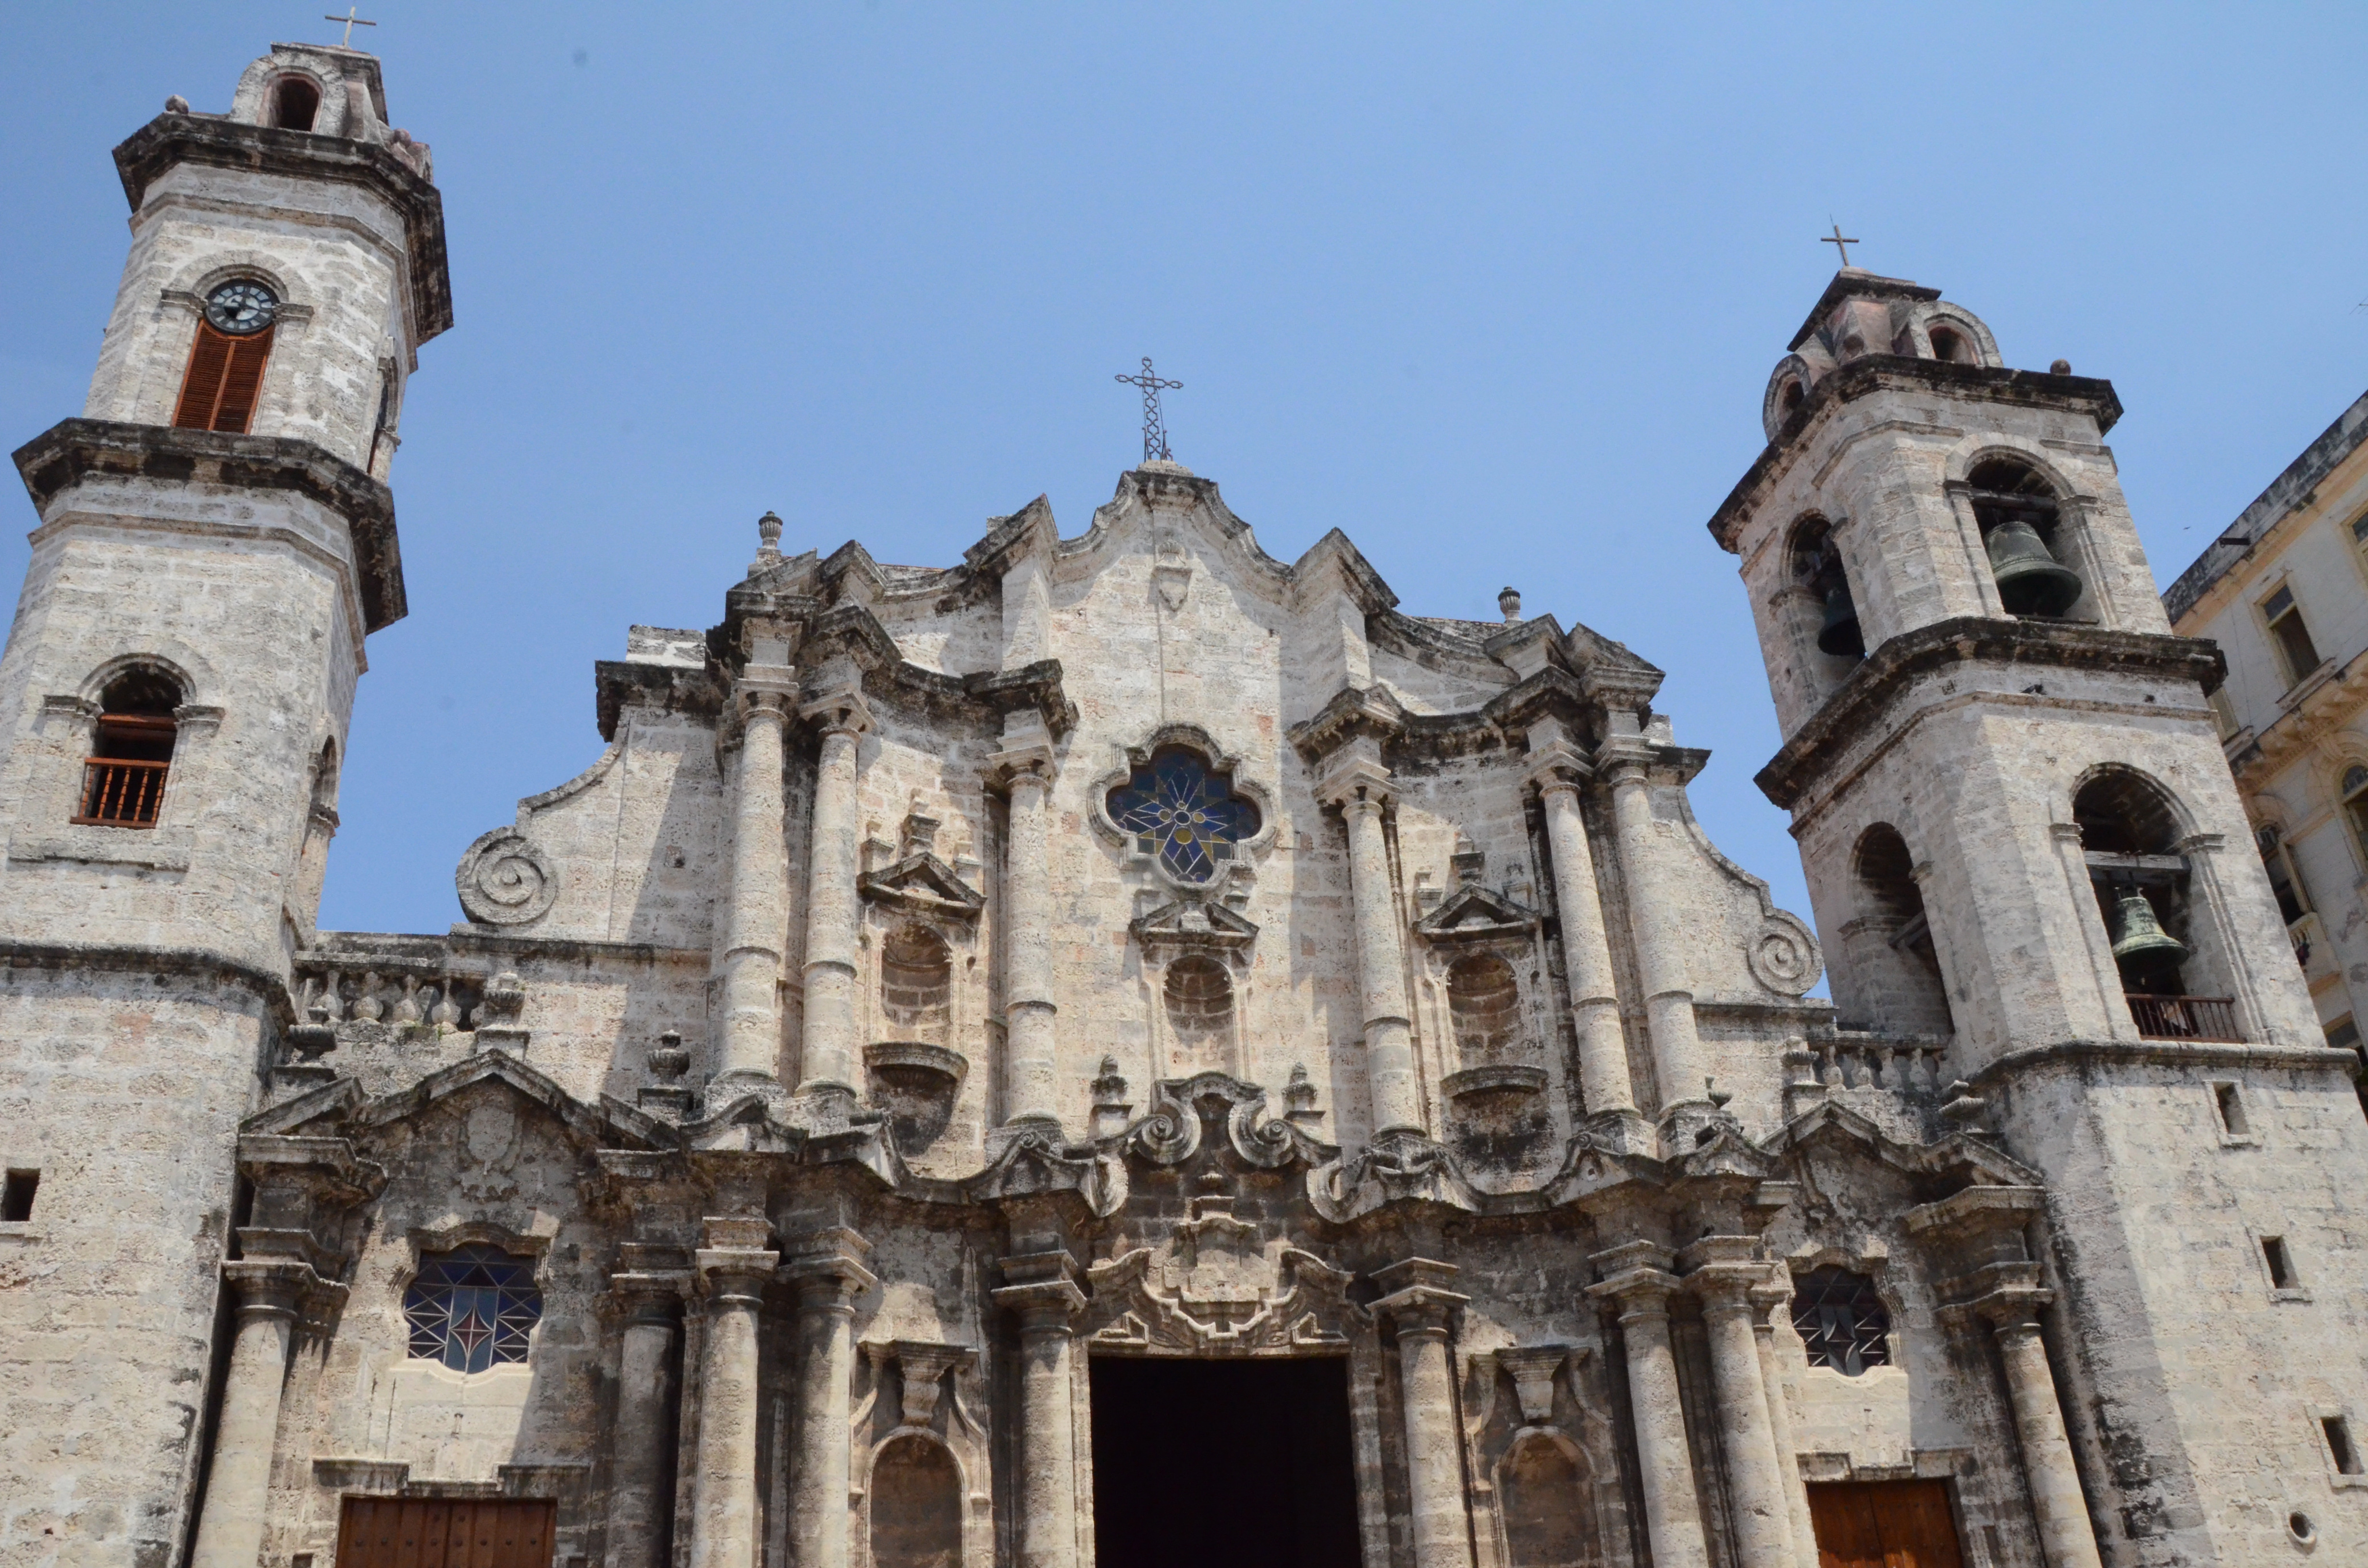 Click picture to see more of Havana's Cathedral Square.